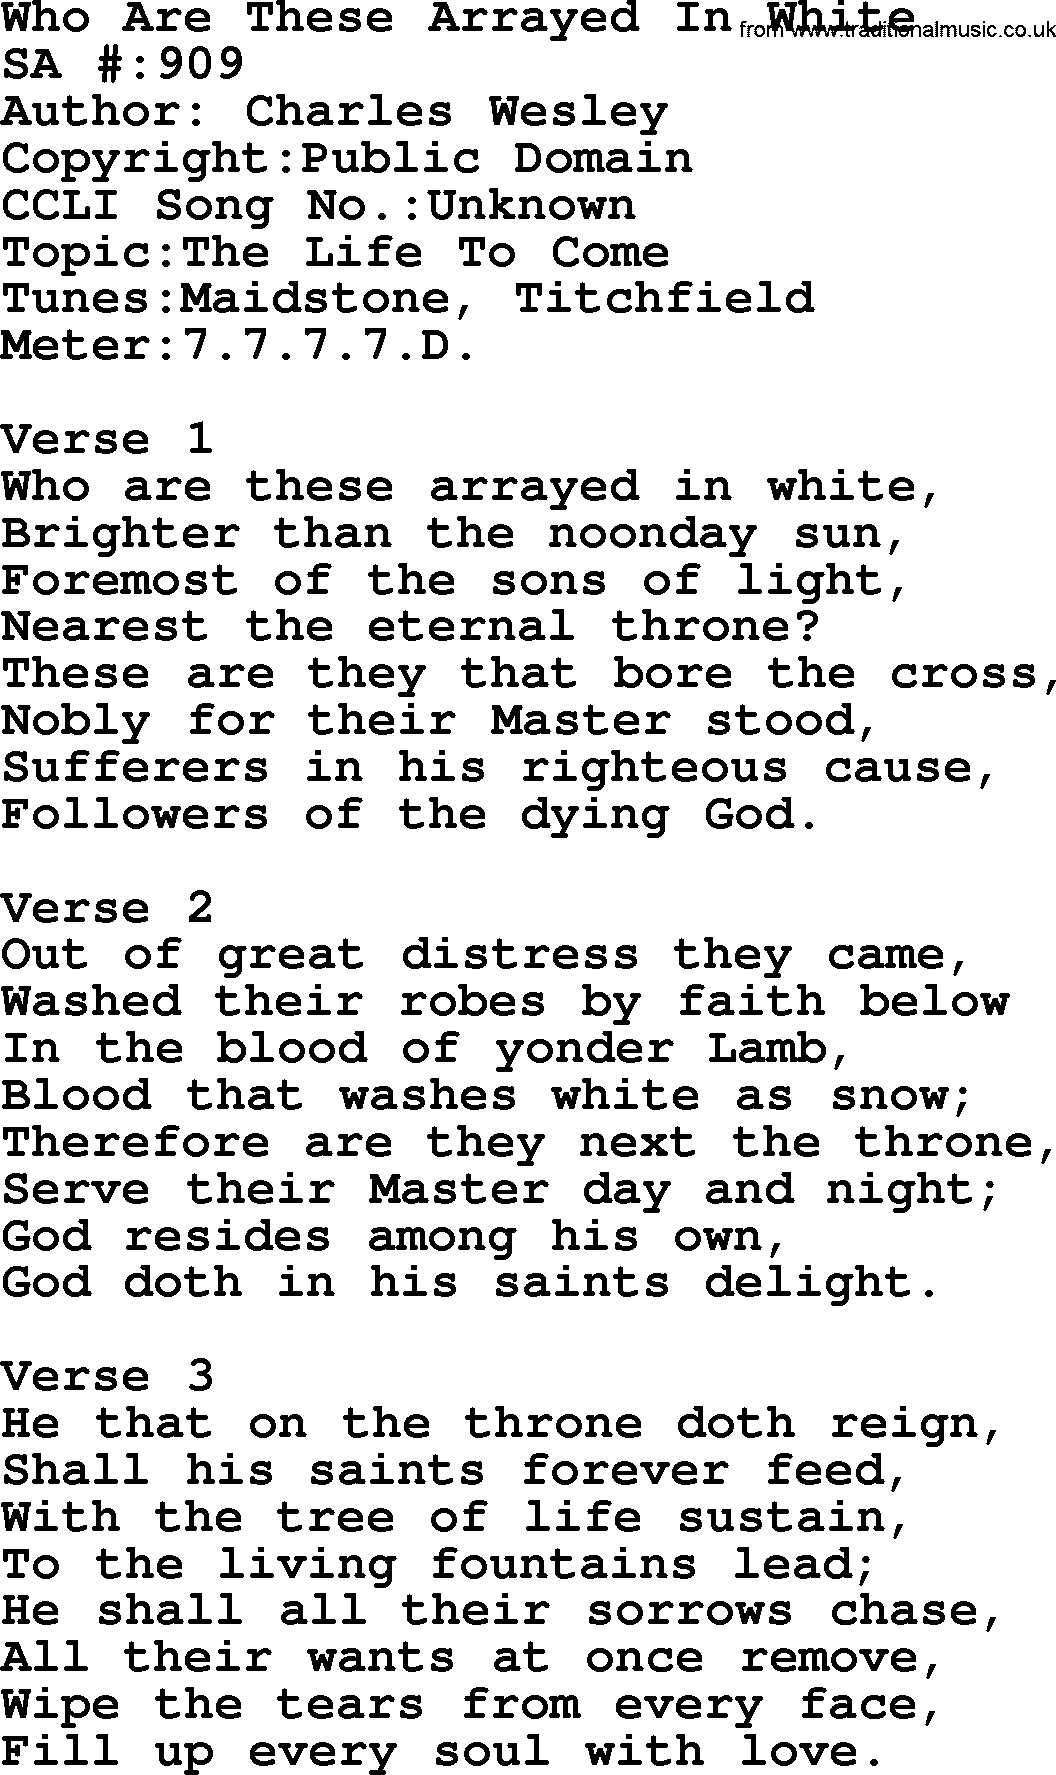 Salvation Army Hymnal, title: Who Are These Arrayed In White, with lyrics and PDF,